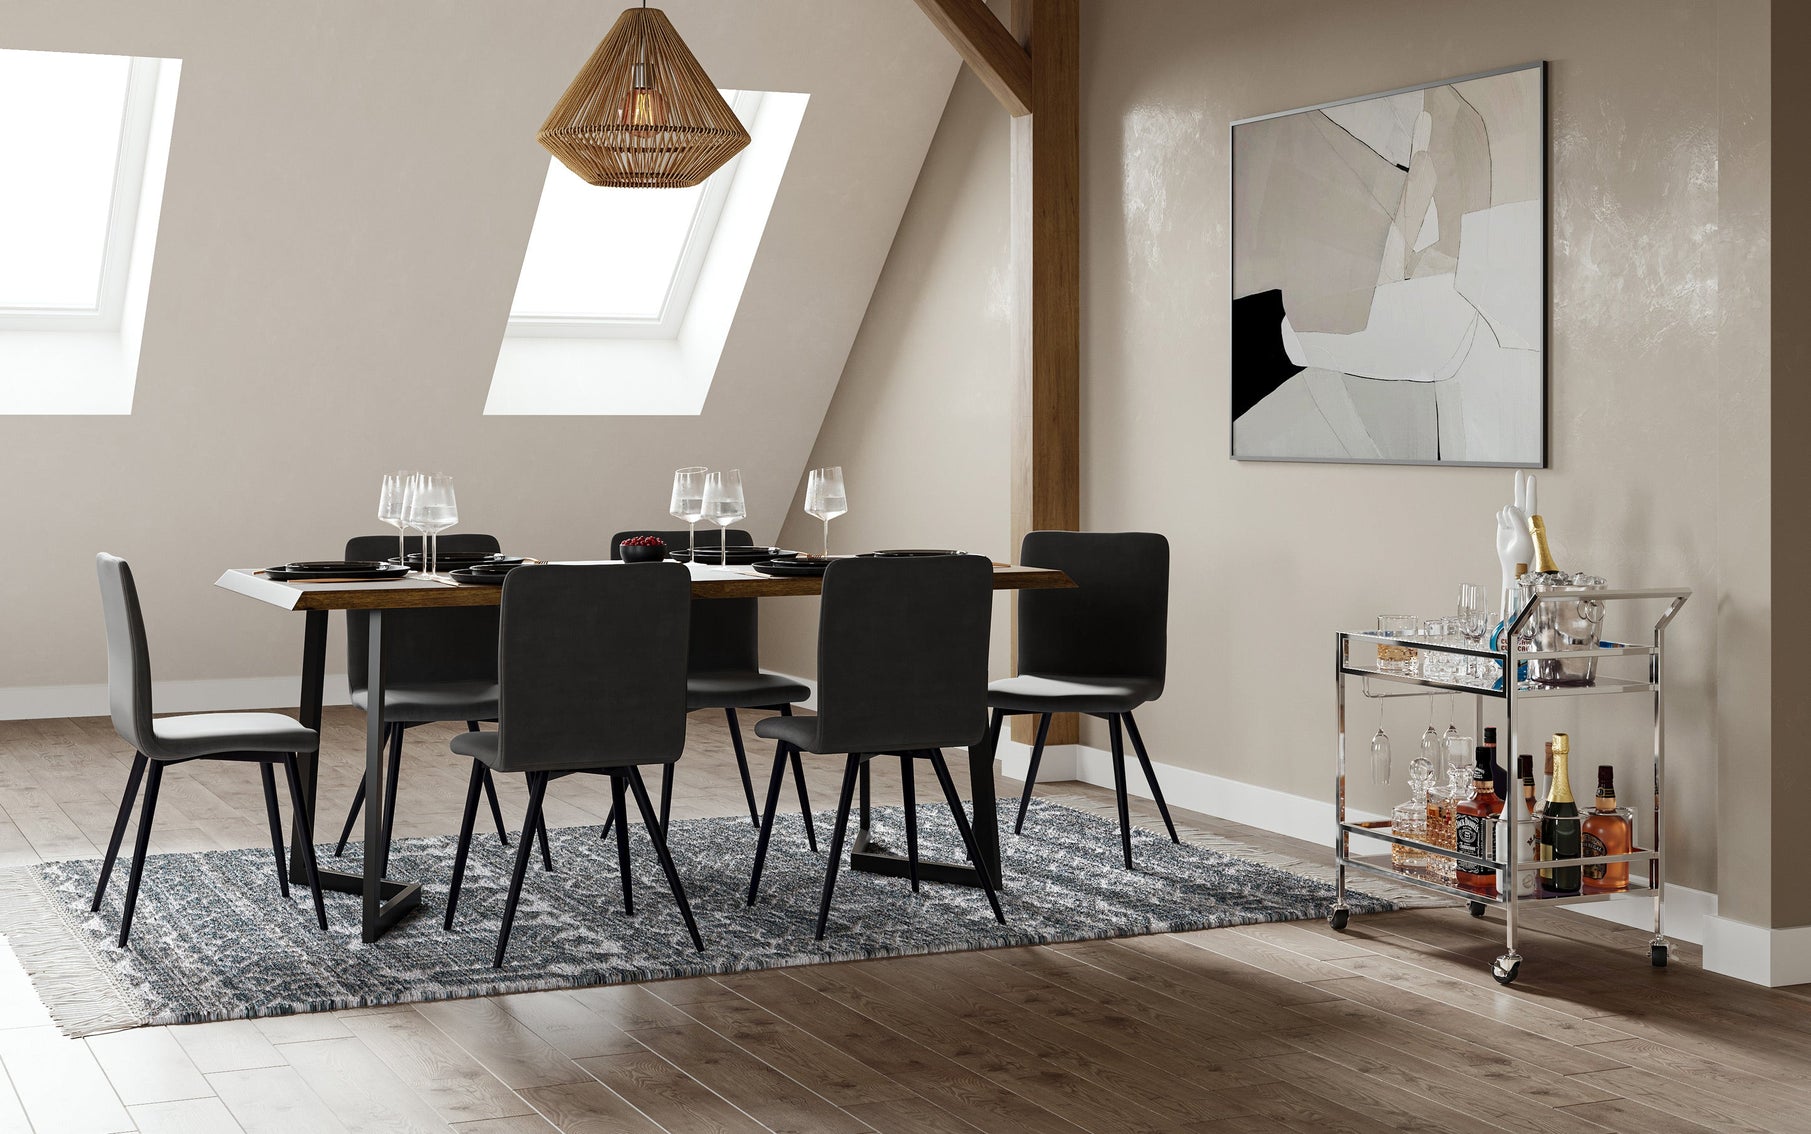 Light Brown | Watkins Dining Table with Inverted Metal Base